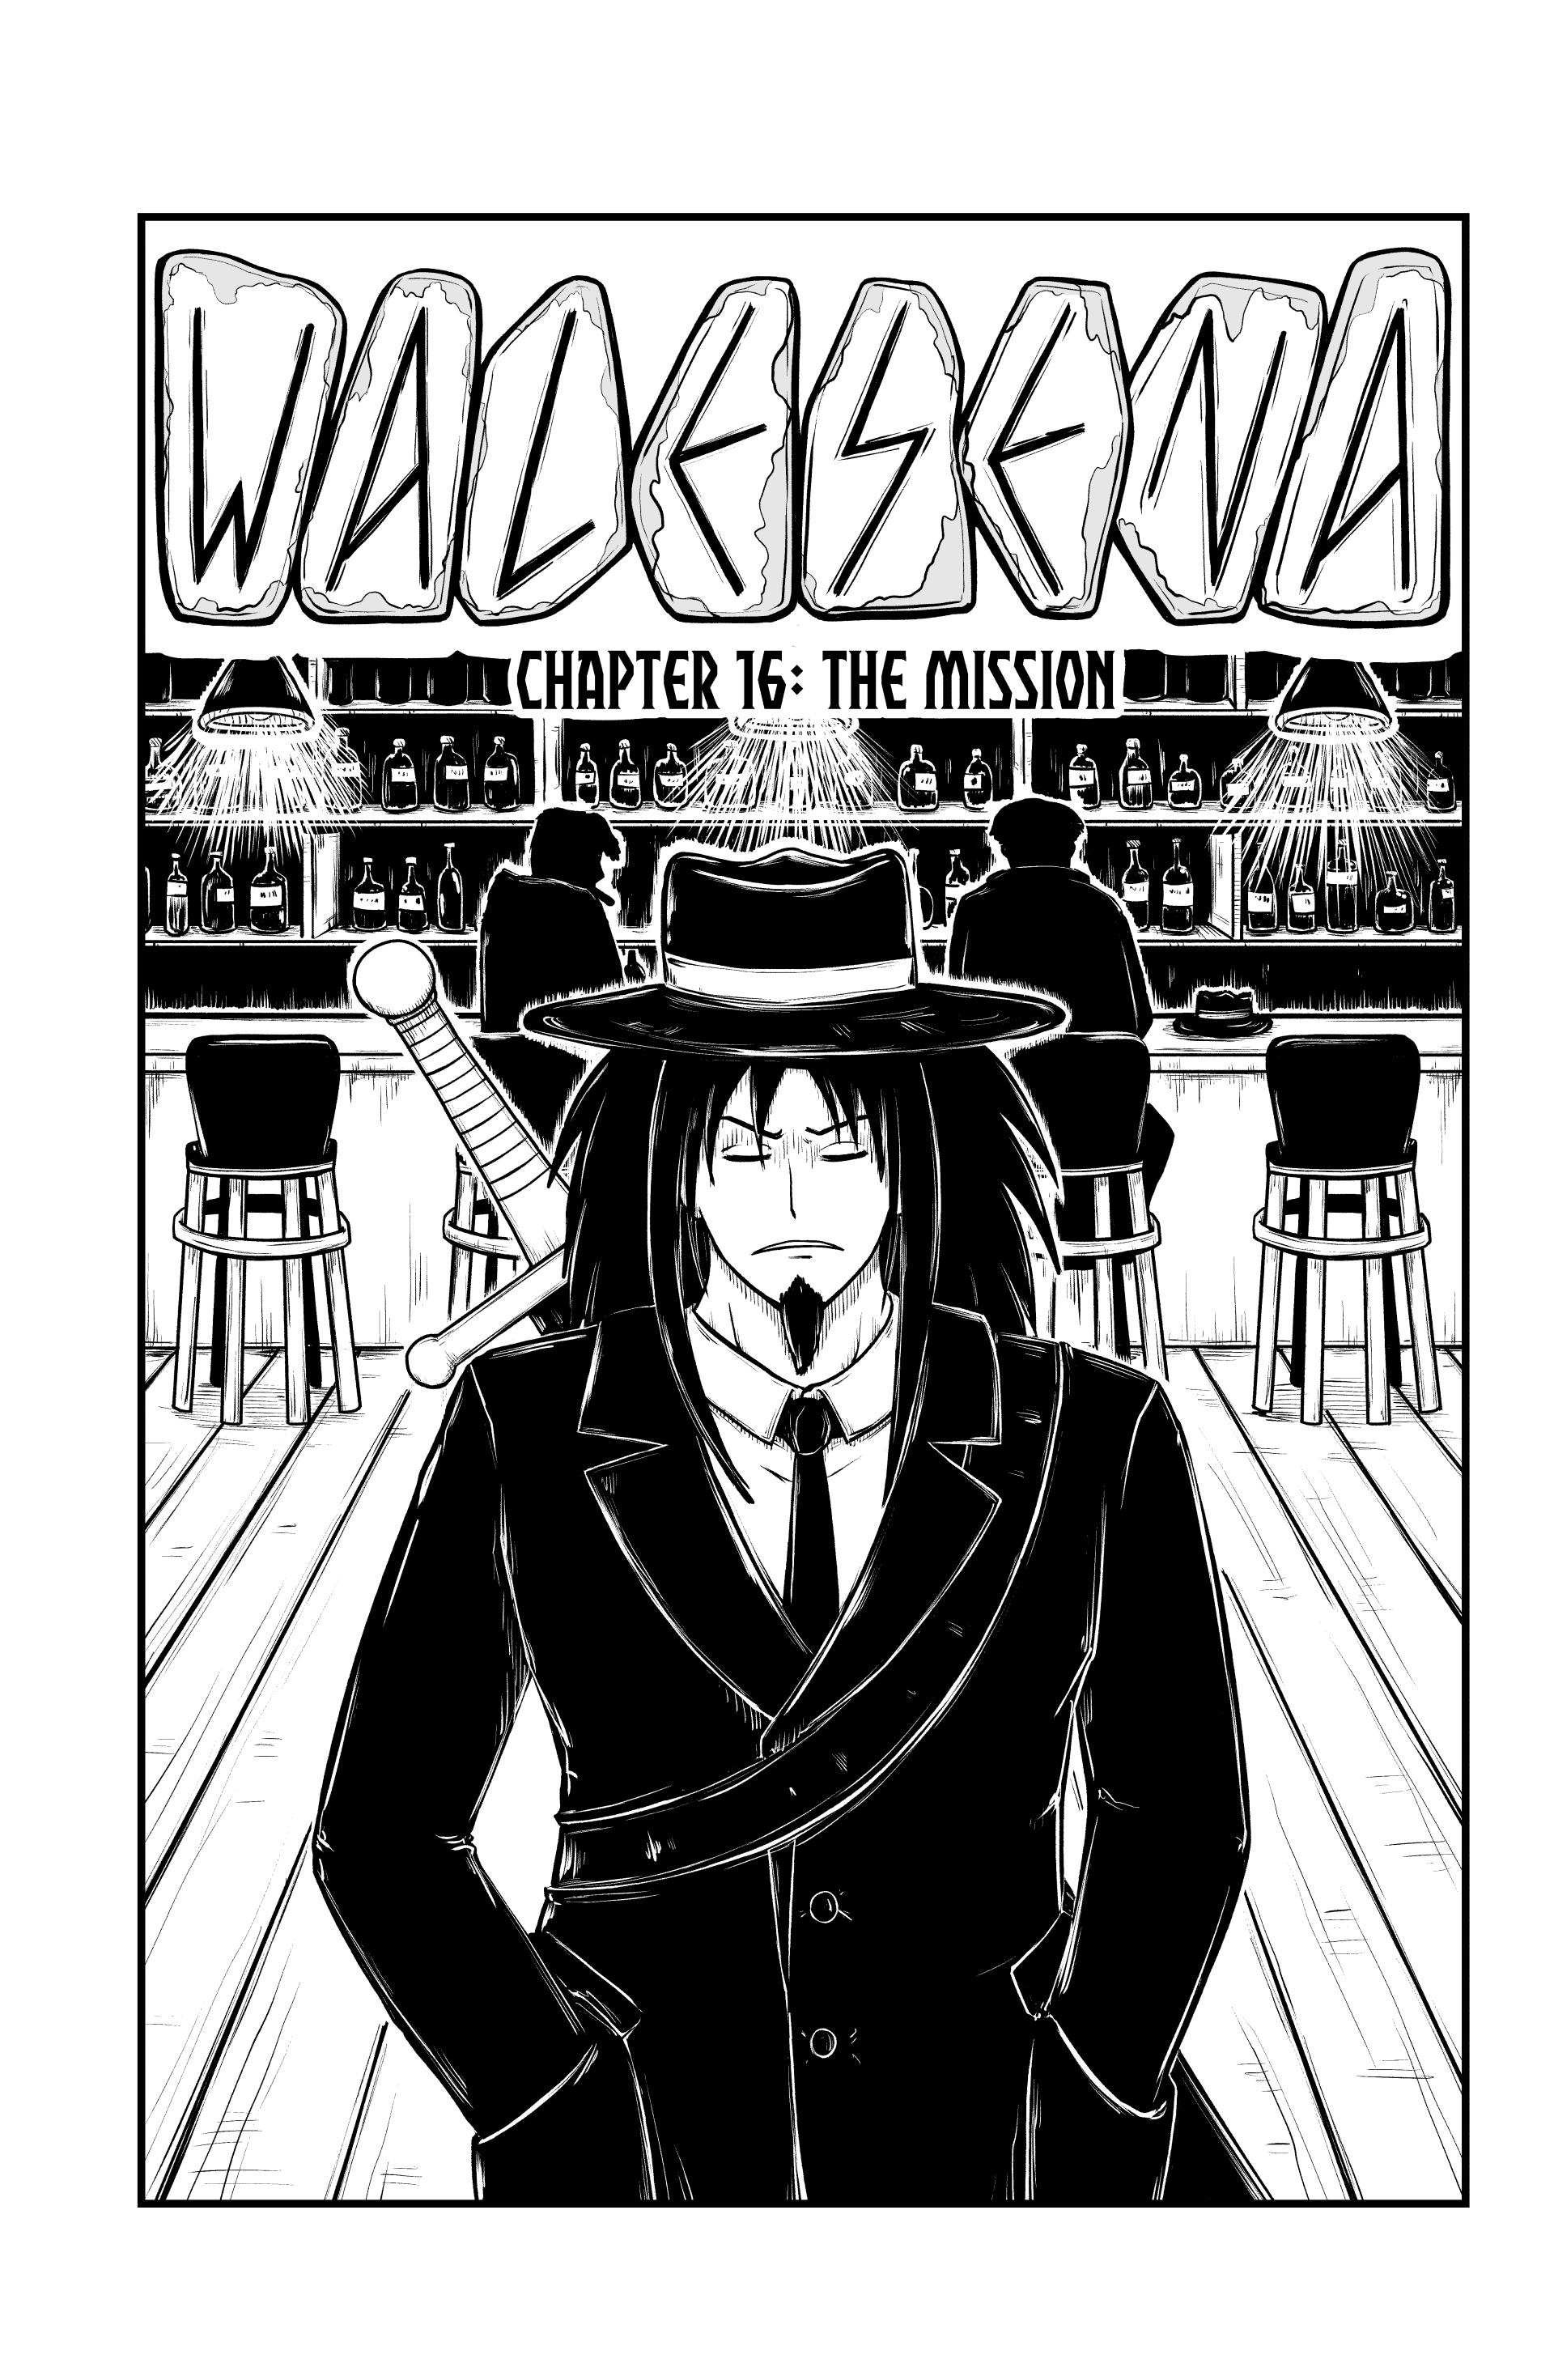 Walesena Vol.2 Chapter 16: The Mission - Picture 1